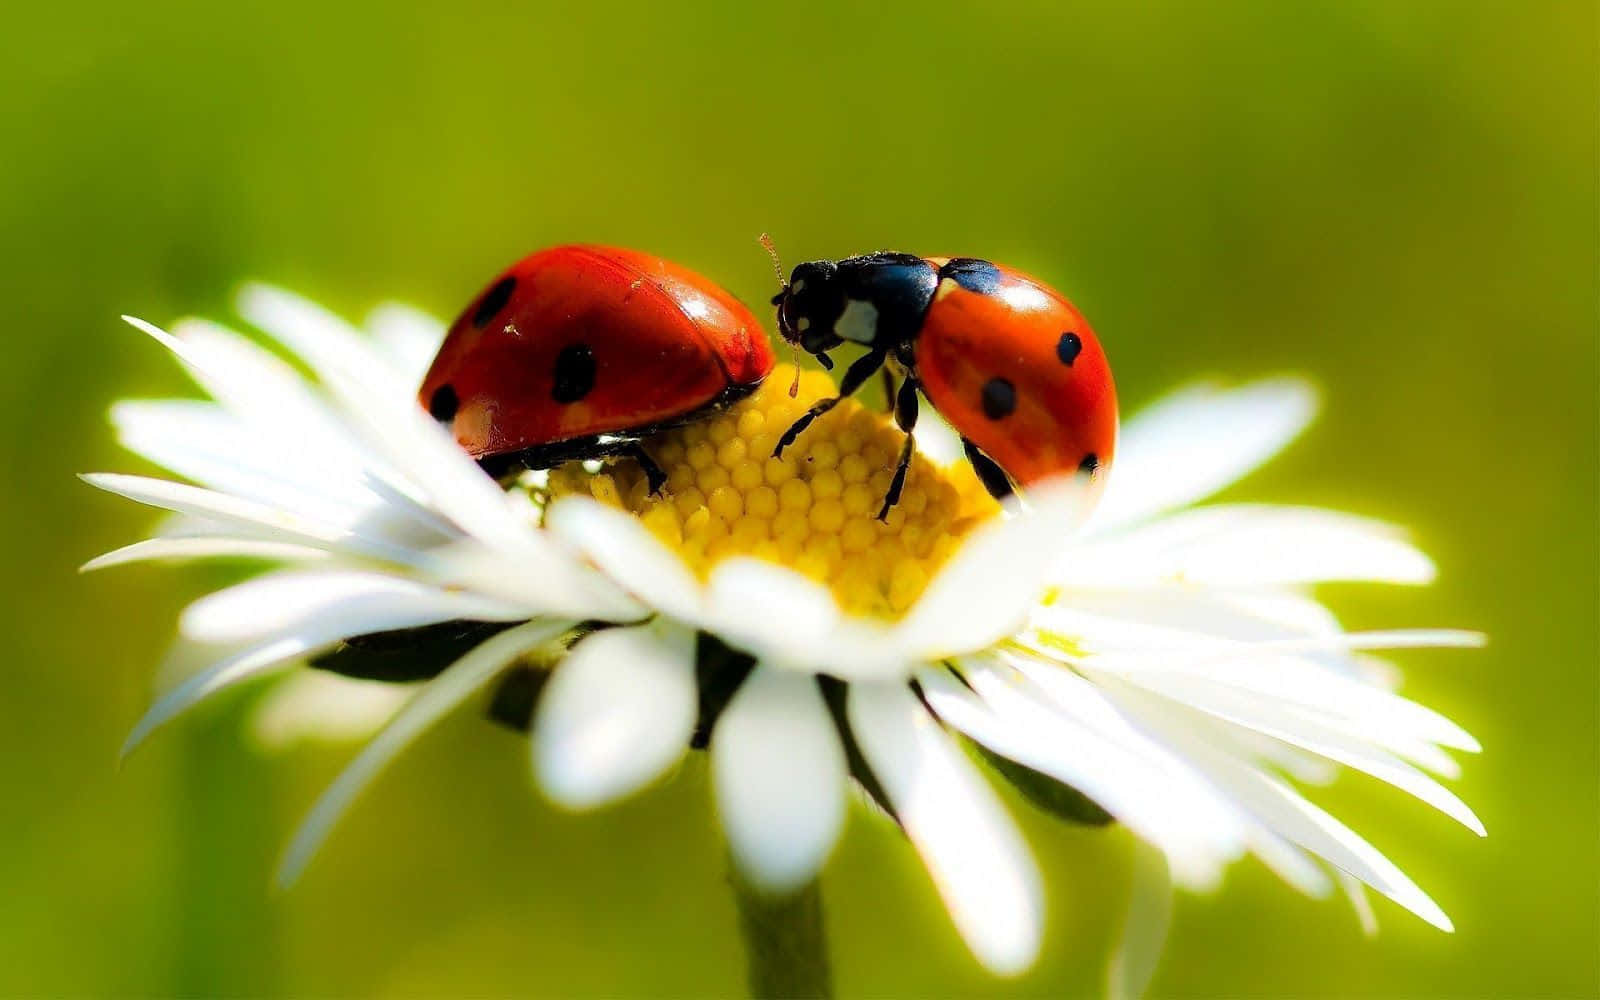 Welcome spring with this cheerful ladybug wallpaper